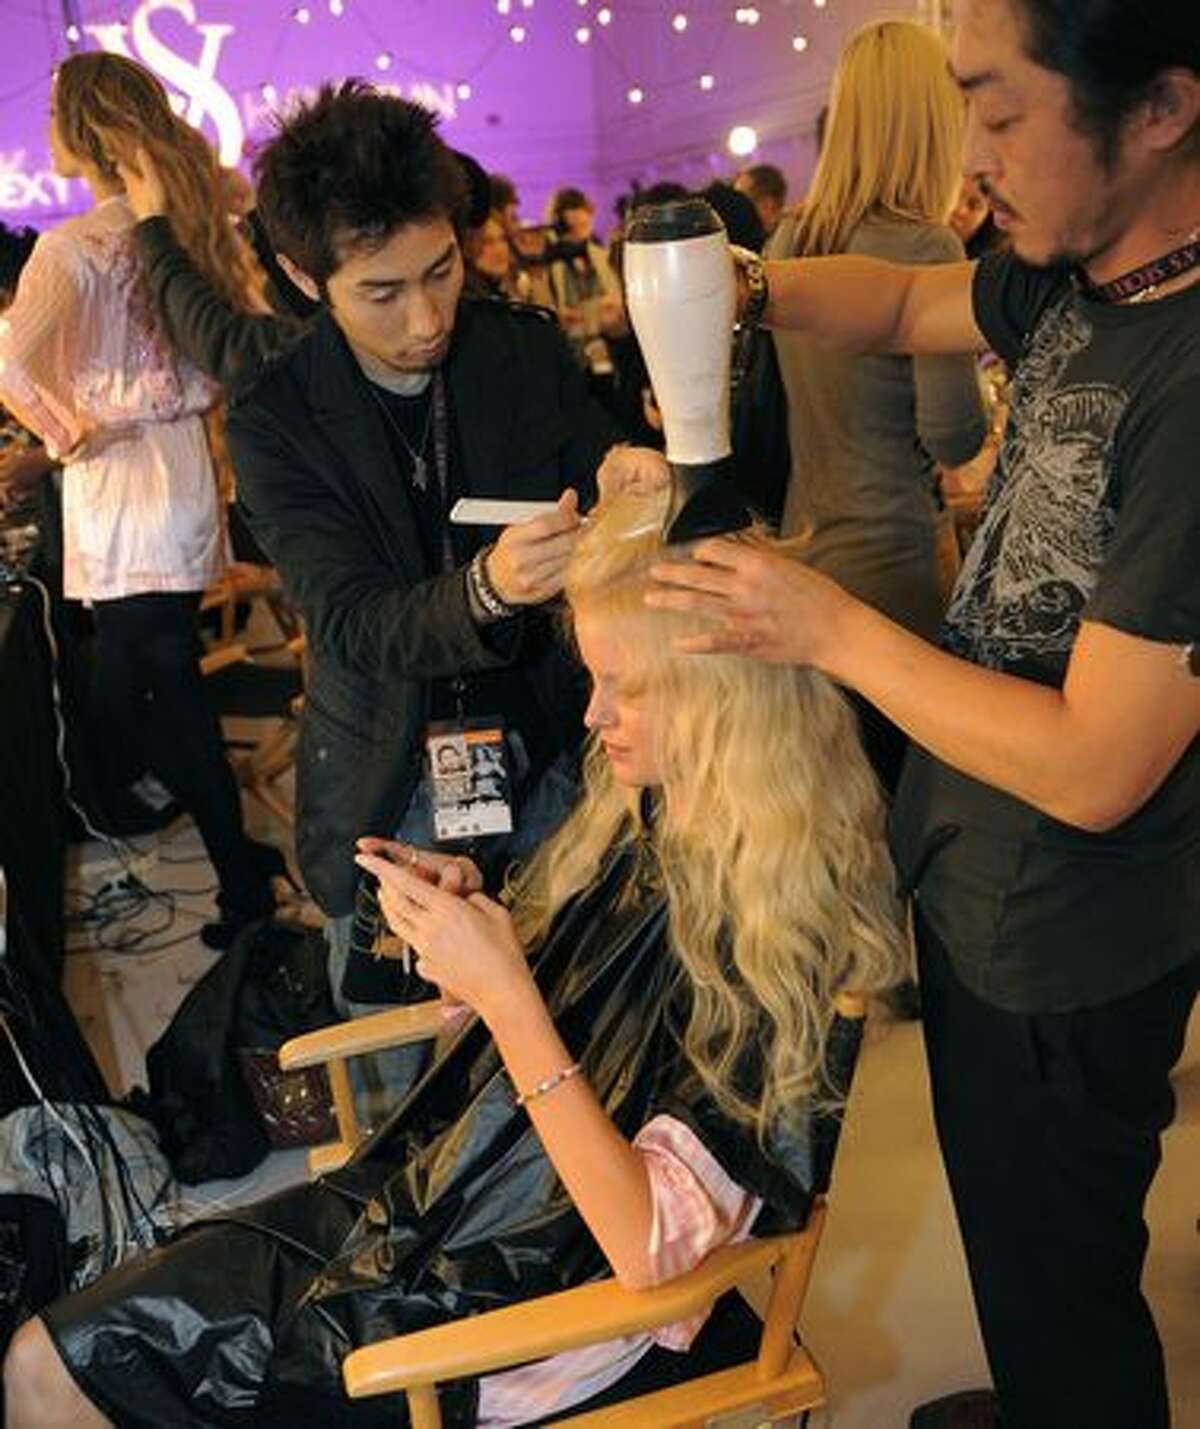 Victoria's Secret model Caroline Winberg backstage in hair and make-up before the start of the Victoria's Secret Fashion Show in New York.